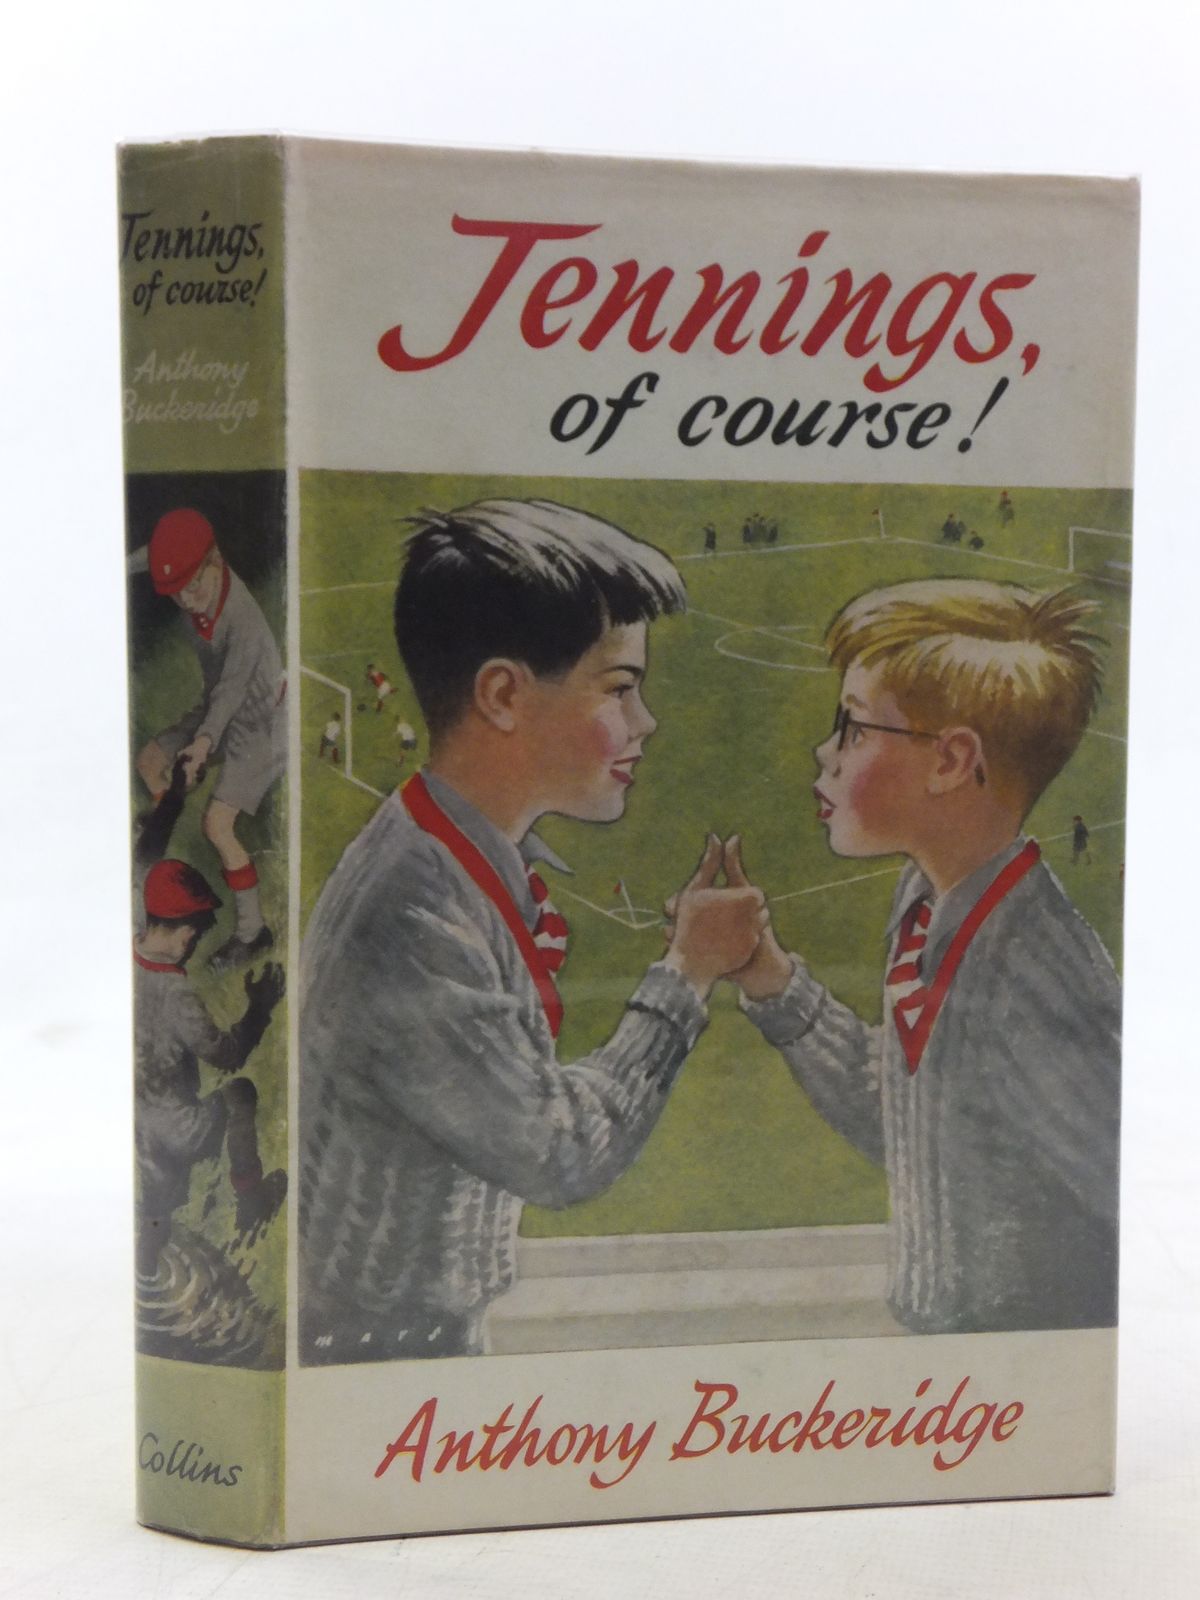 Cover of JENNINGS, OF COURSE! by Anthony Buckeridge